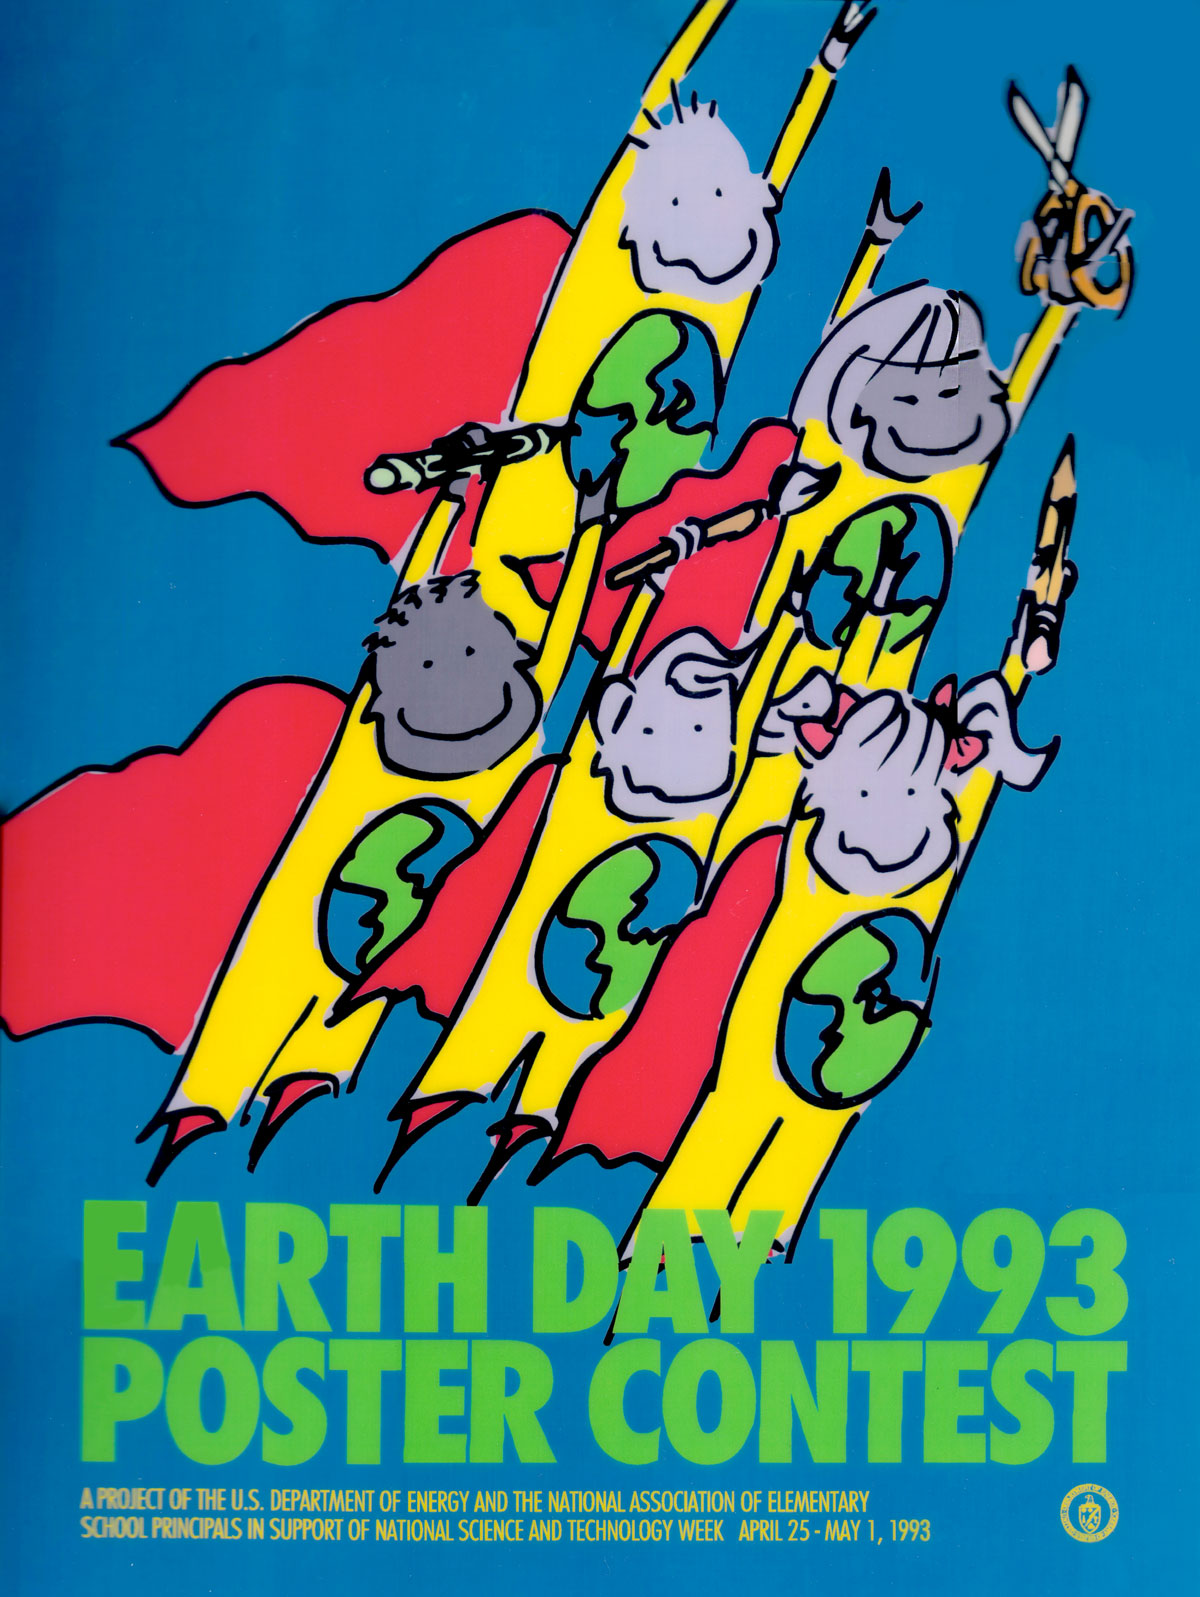 Earthday Campaign US Department of Energy